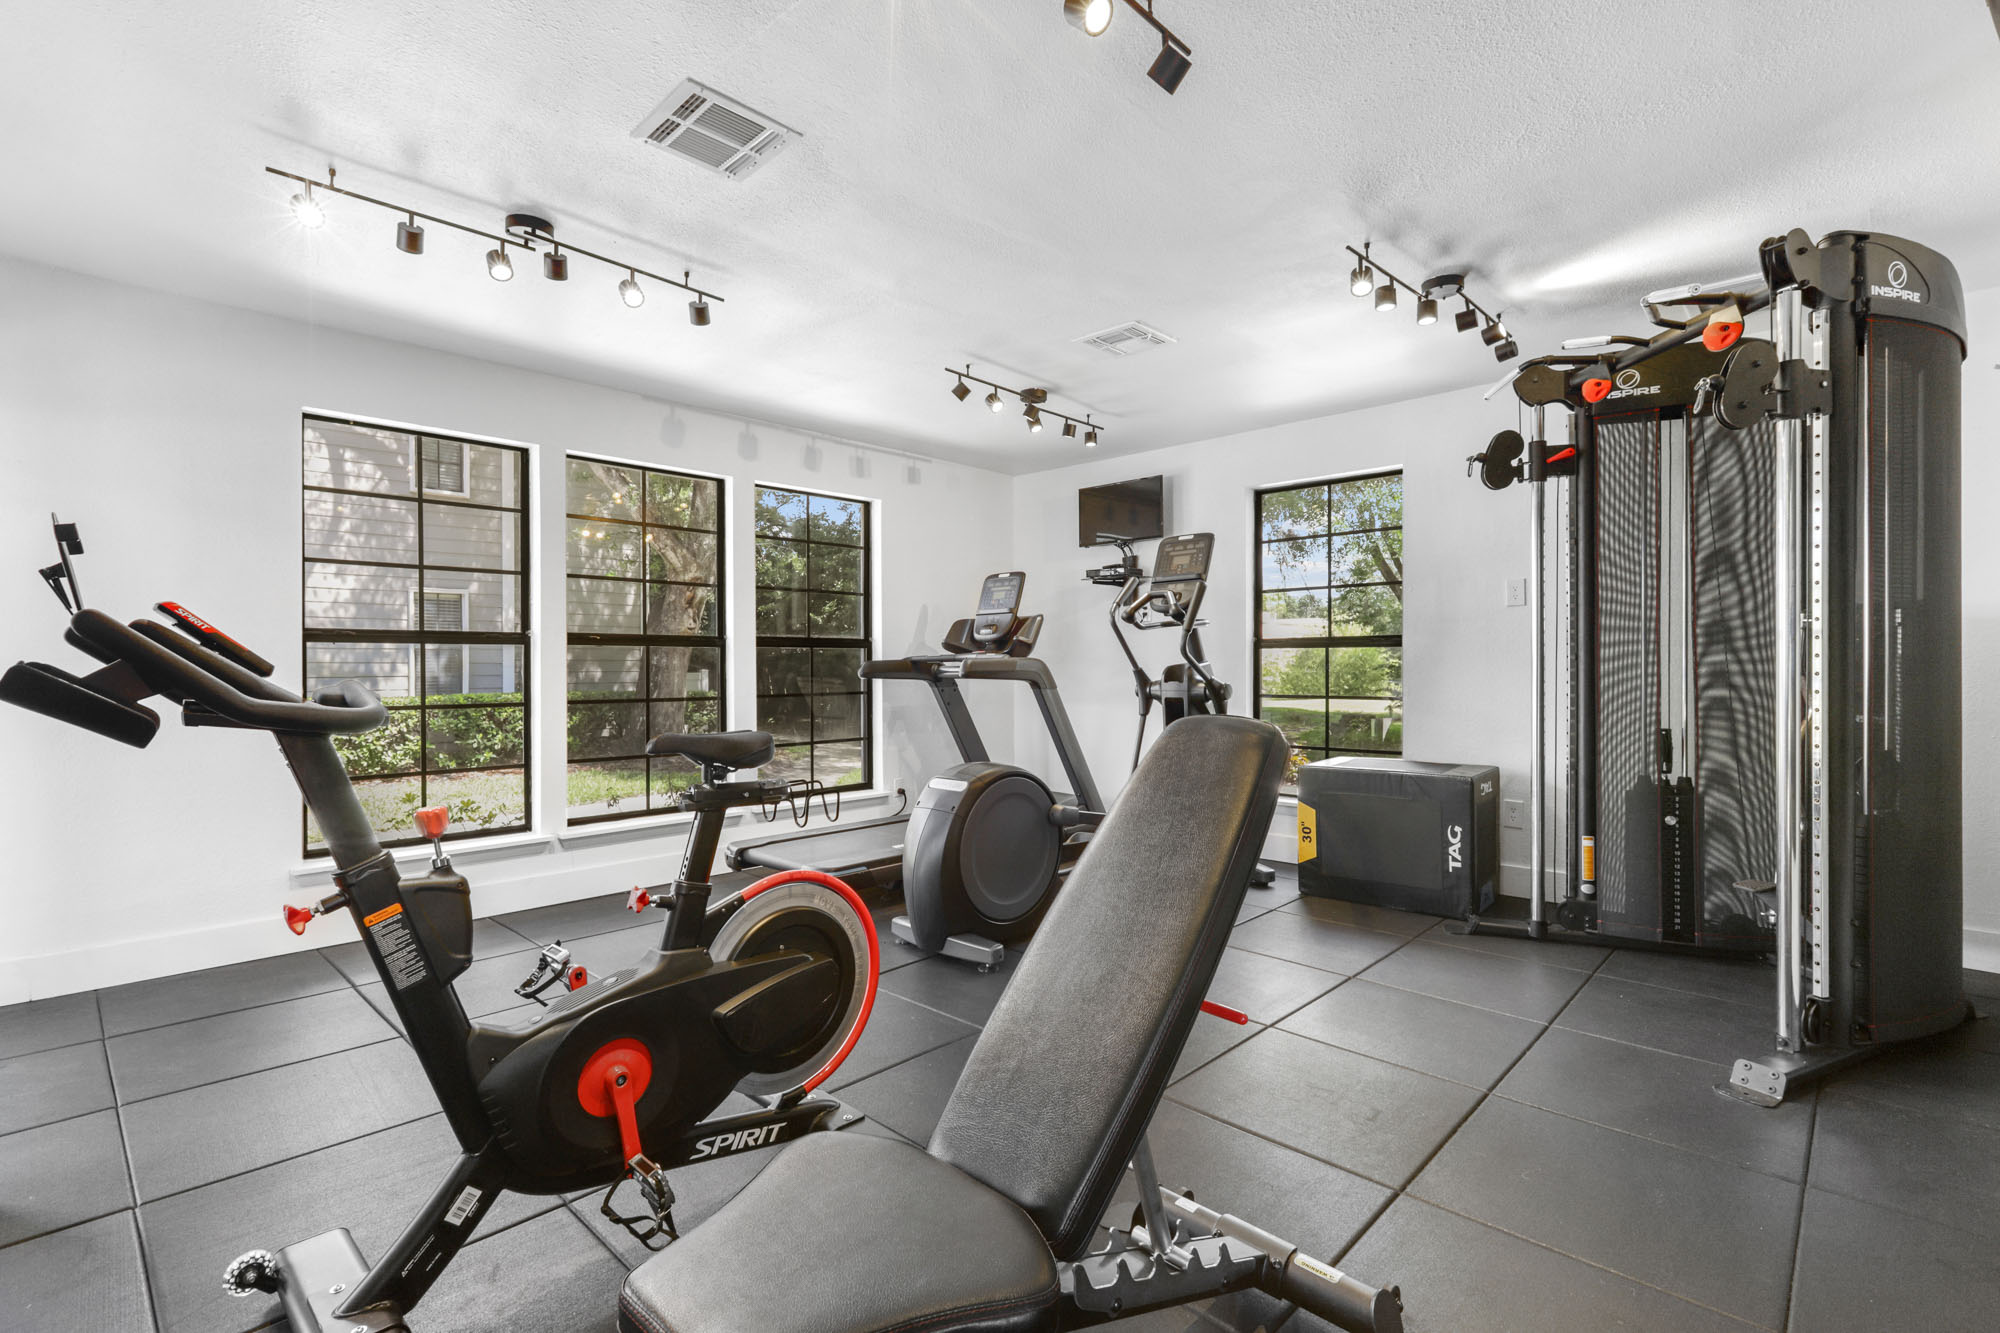 The fitness center at St. James Crossing apartments in Tampa, Florida.